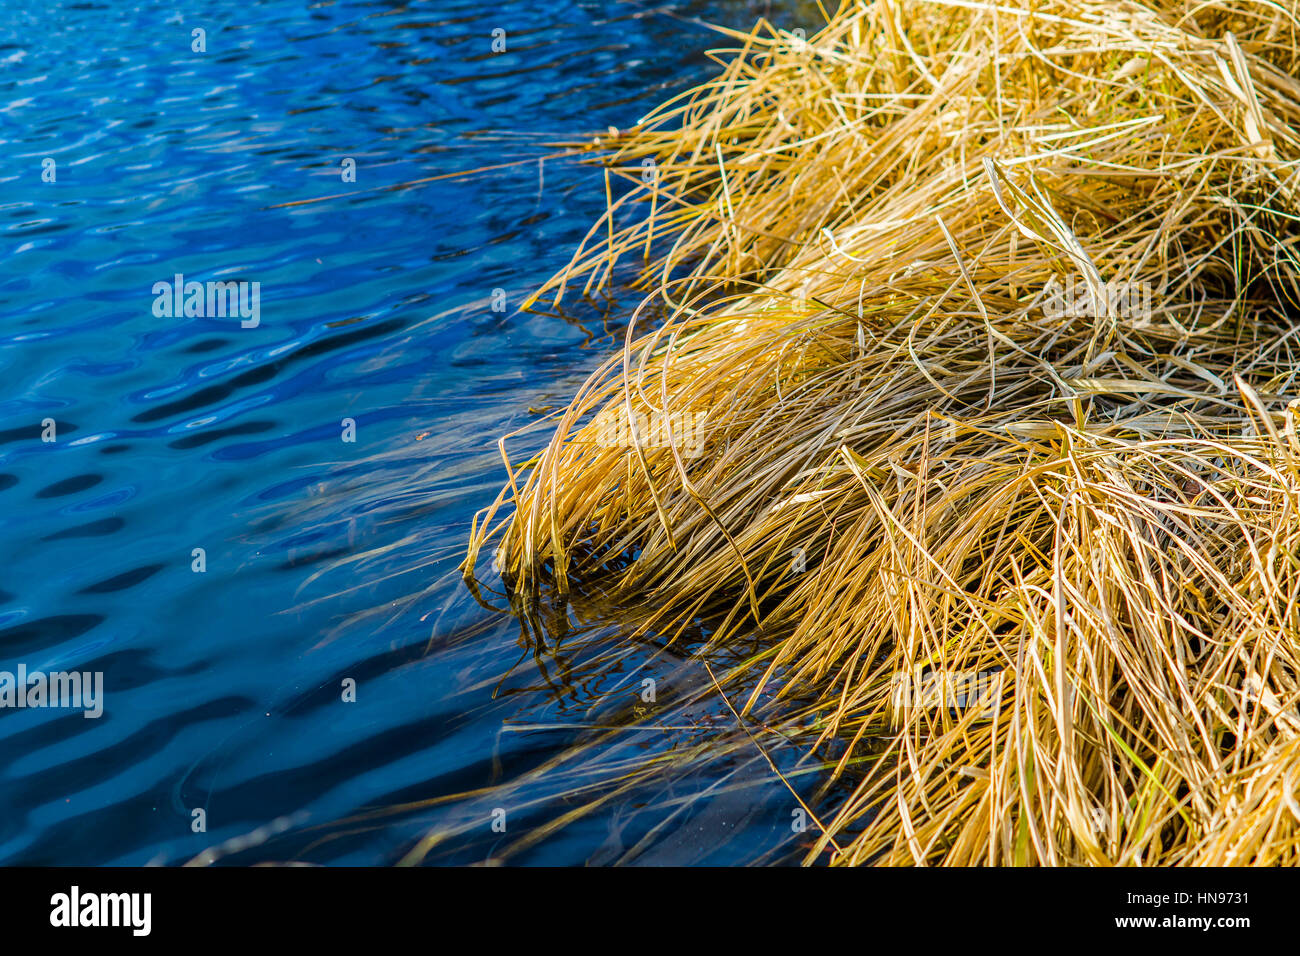 Dry ling, reed, carex, plants in the cold water of the autumn river, pond or lake. The end of the autumn. Yellow, orange, blue and gray colors Stock Photo